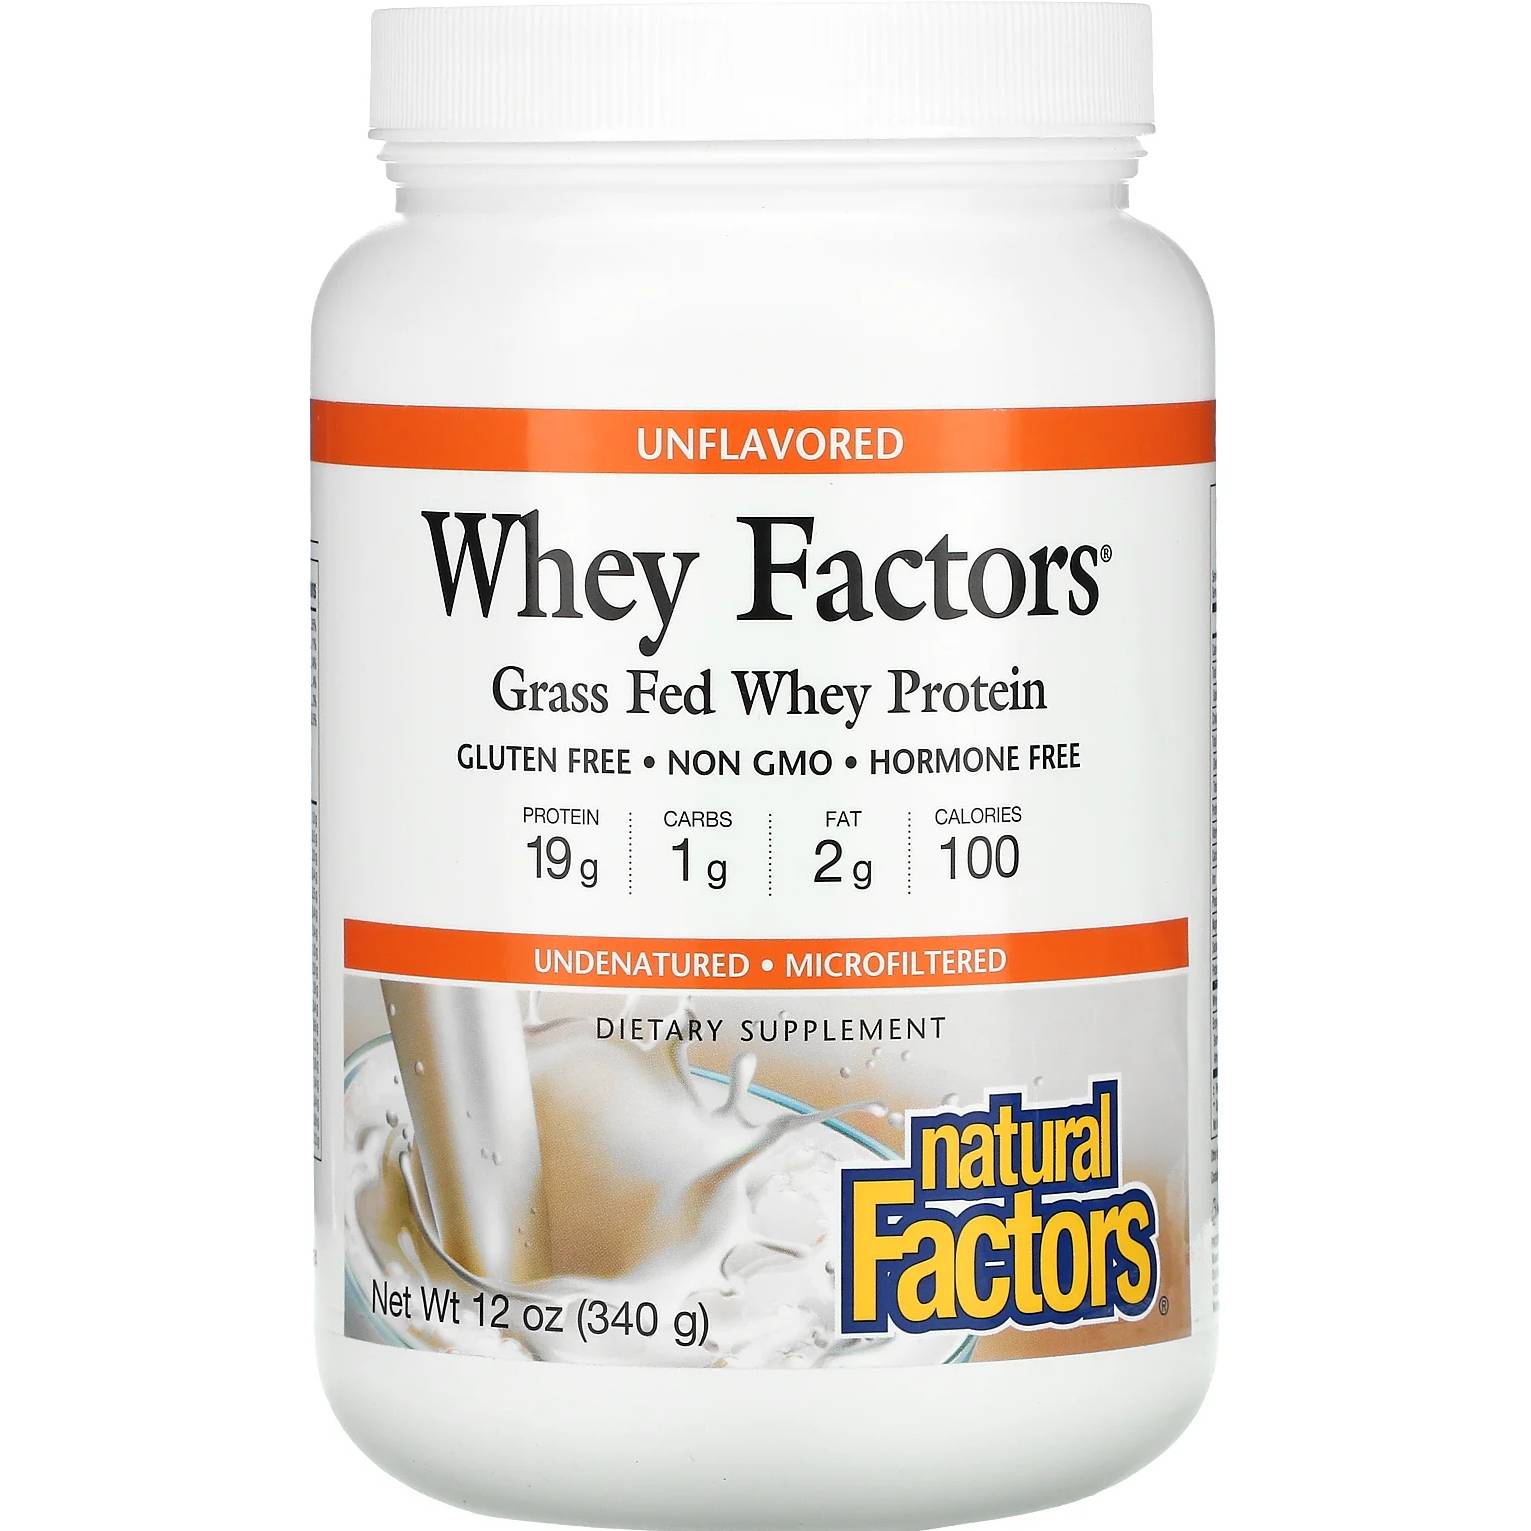 Natural Factors Whey Factors Protein 1 kg Unflavored